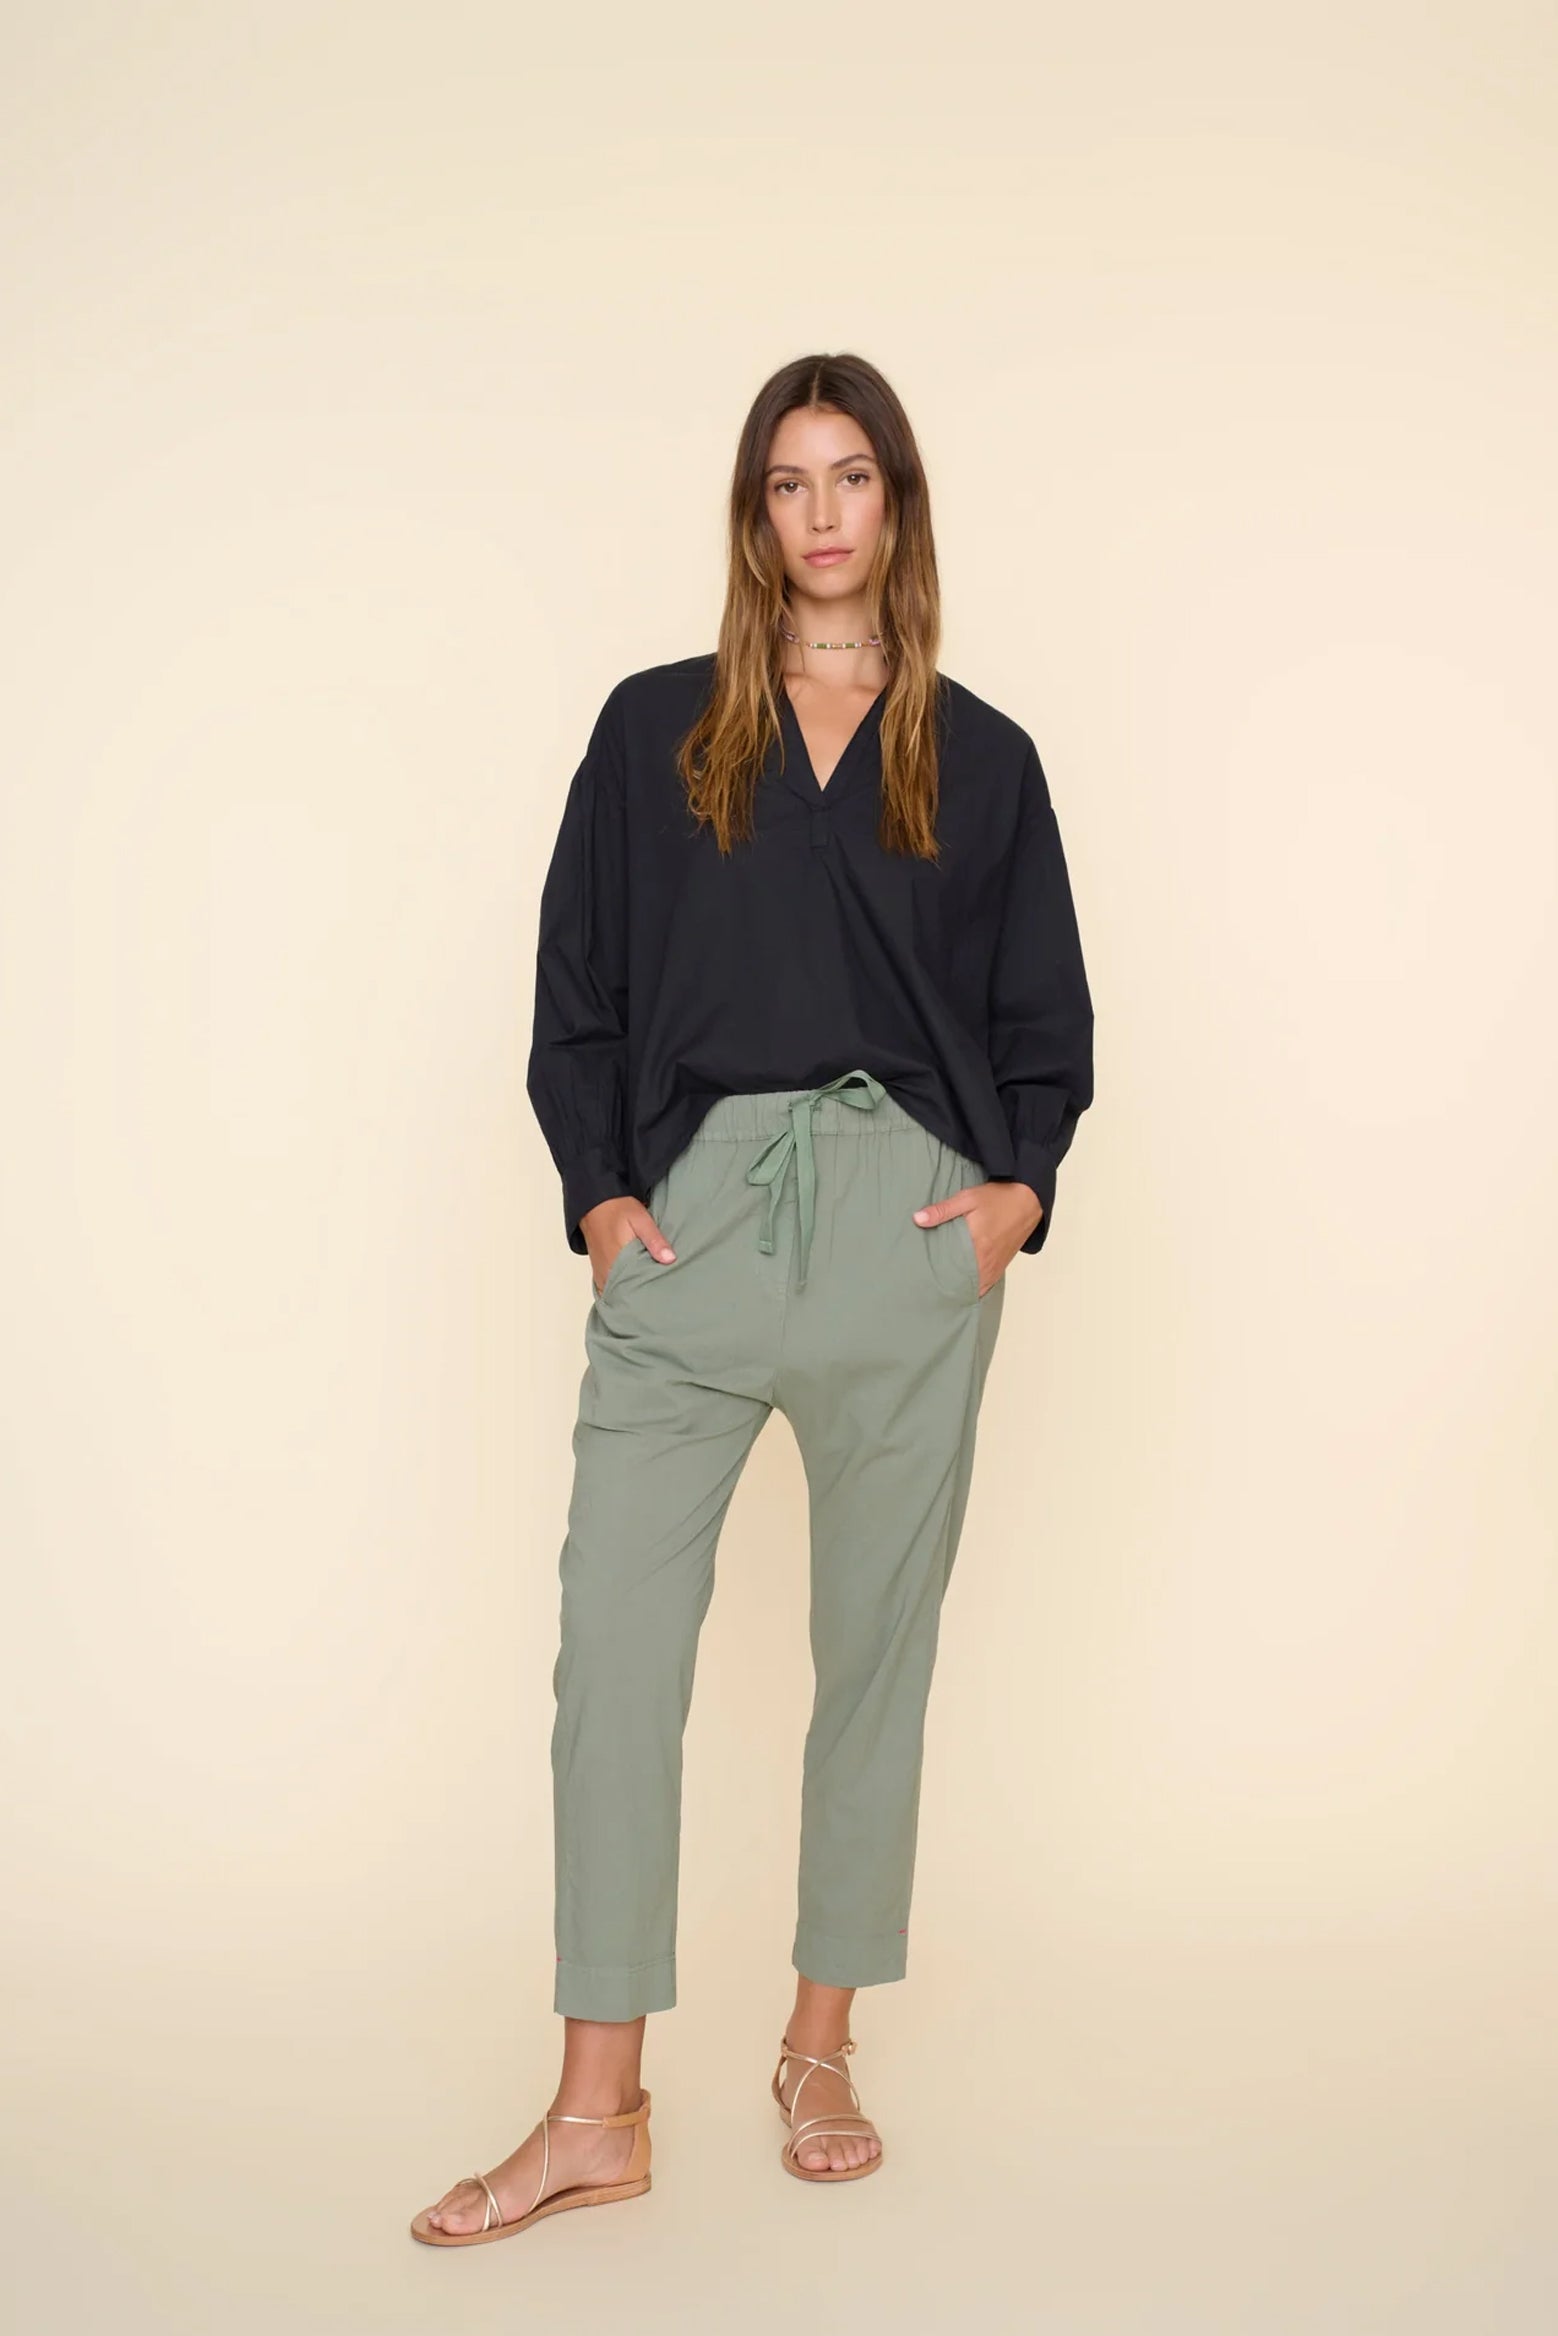 Pants New Arrivals for Women | Shop the Latest Pants for Women at Best  Prices at Pepe Jeans India!